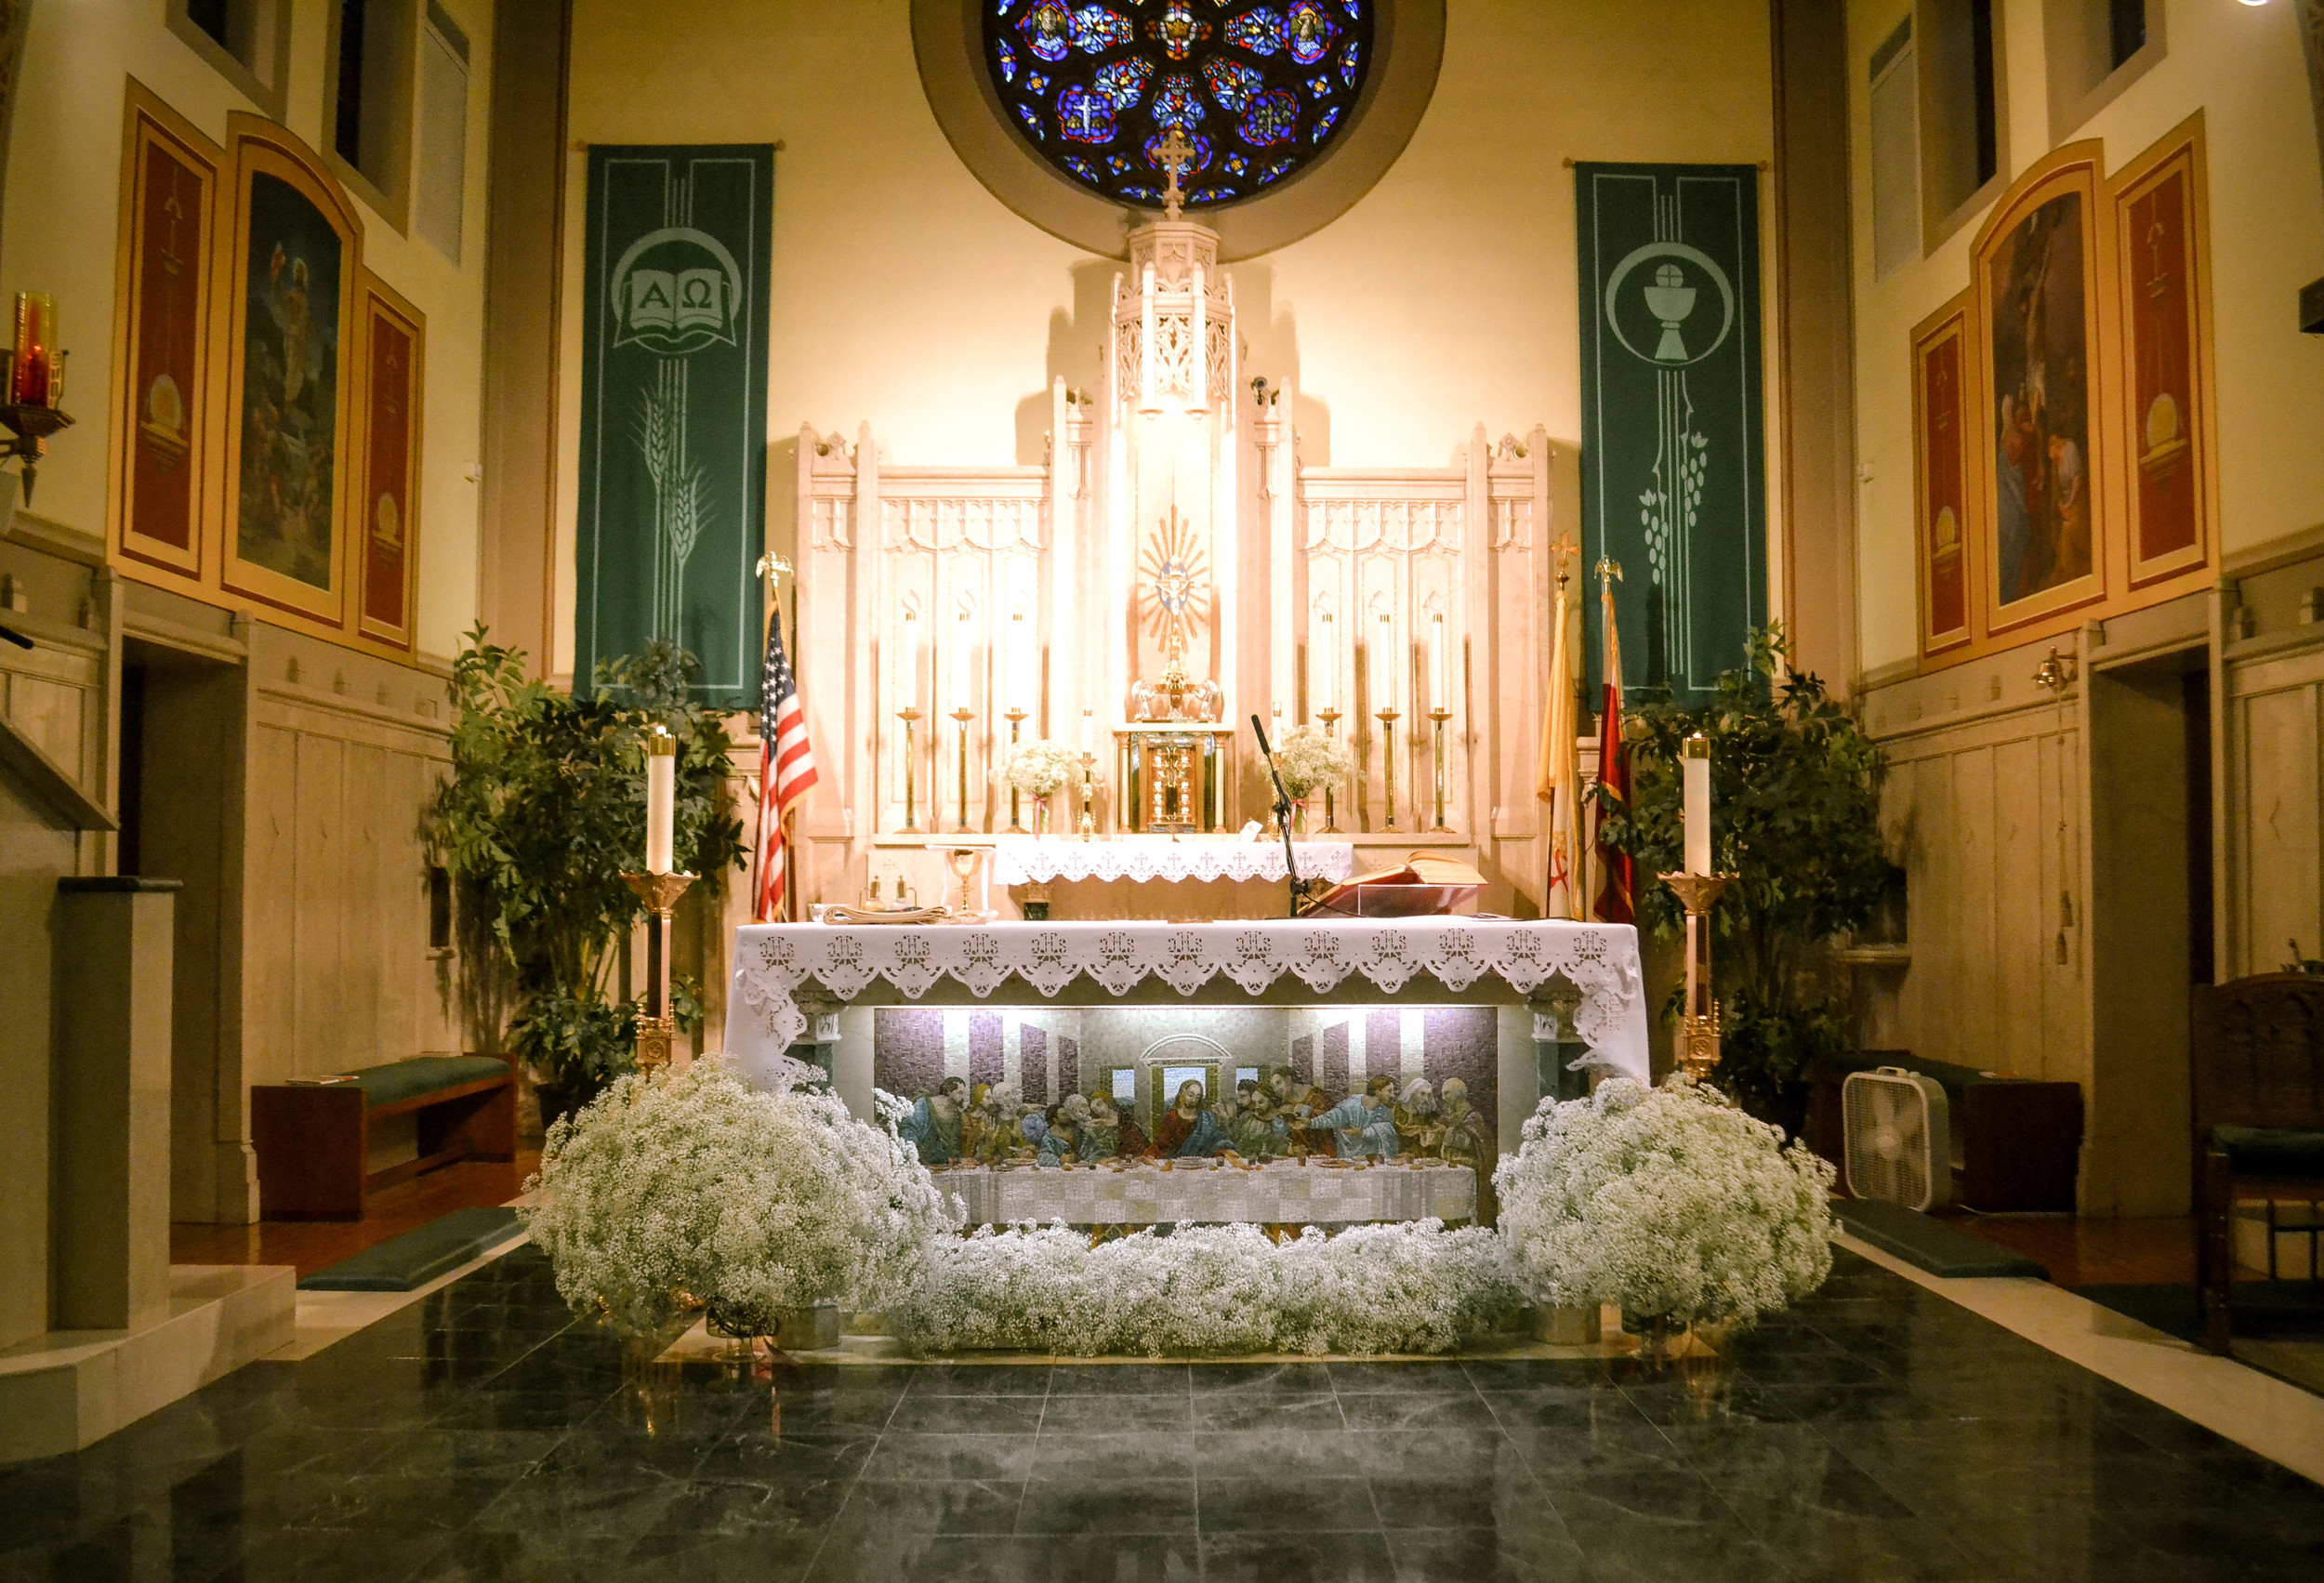 St. Cyril and Methodious Church, Greenpoint Church wedding. Baby's breath church decorations.